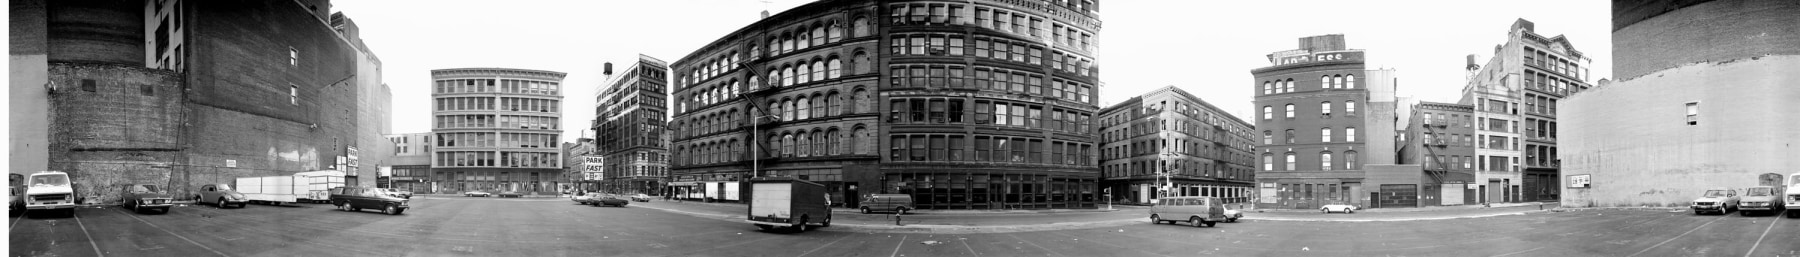 Parking Lot, Mercer and Grand Streets, 1980

gelatin silver print, edition of 10

15 1/2 x 100 in. / 39.4 x 254 cm